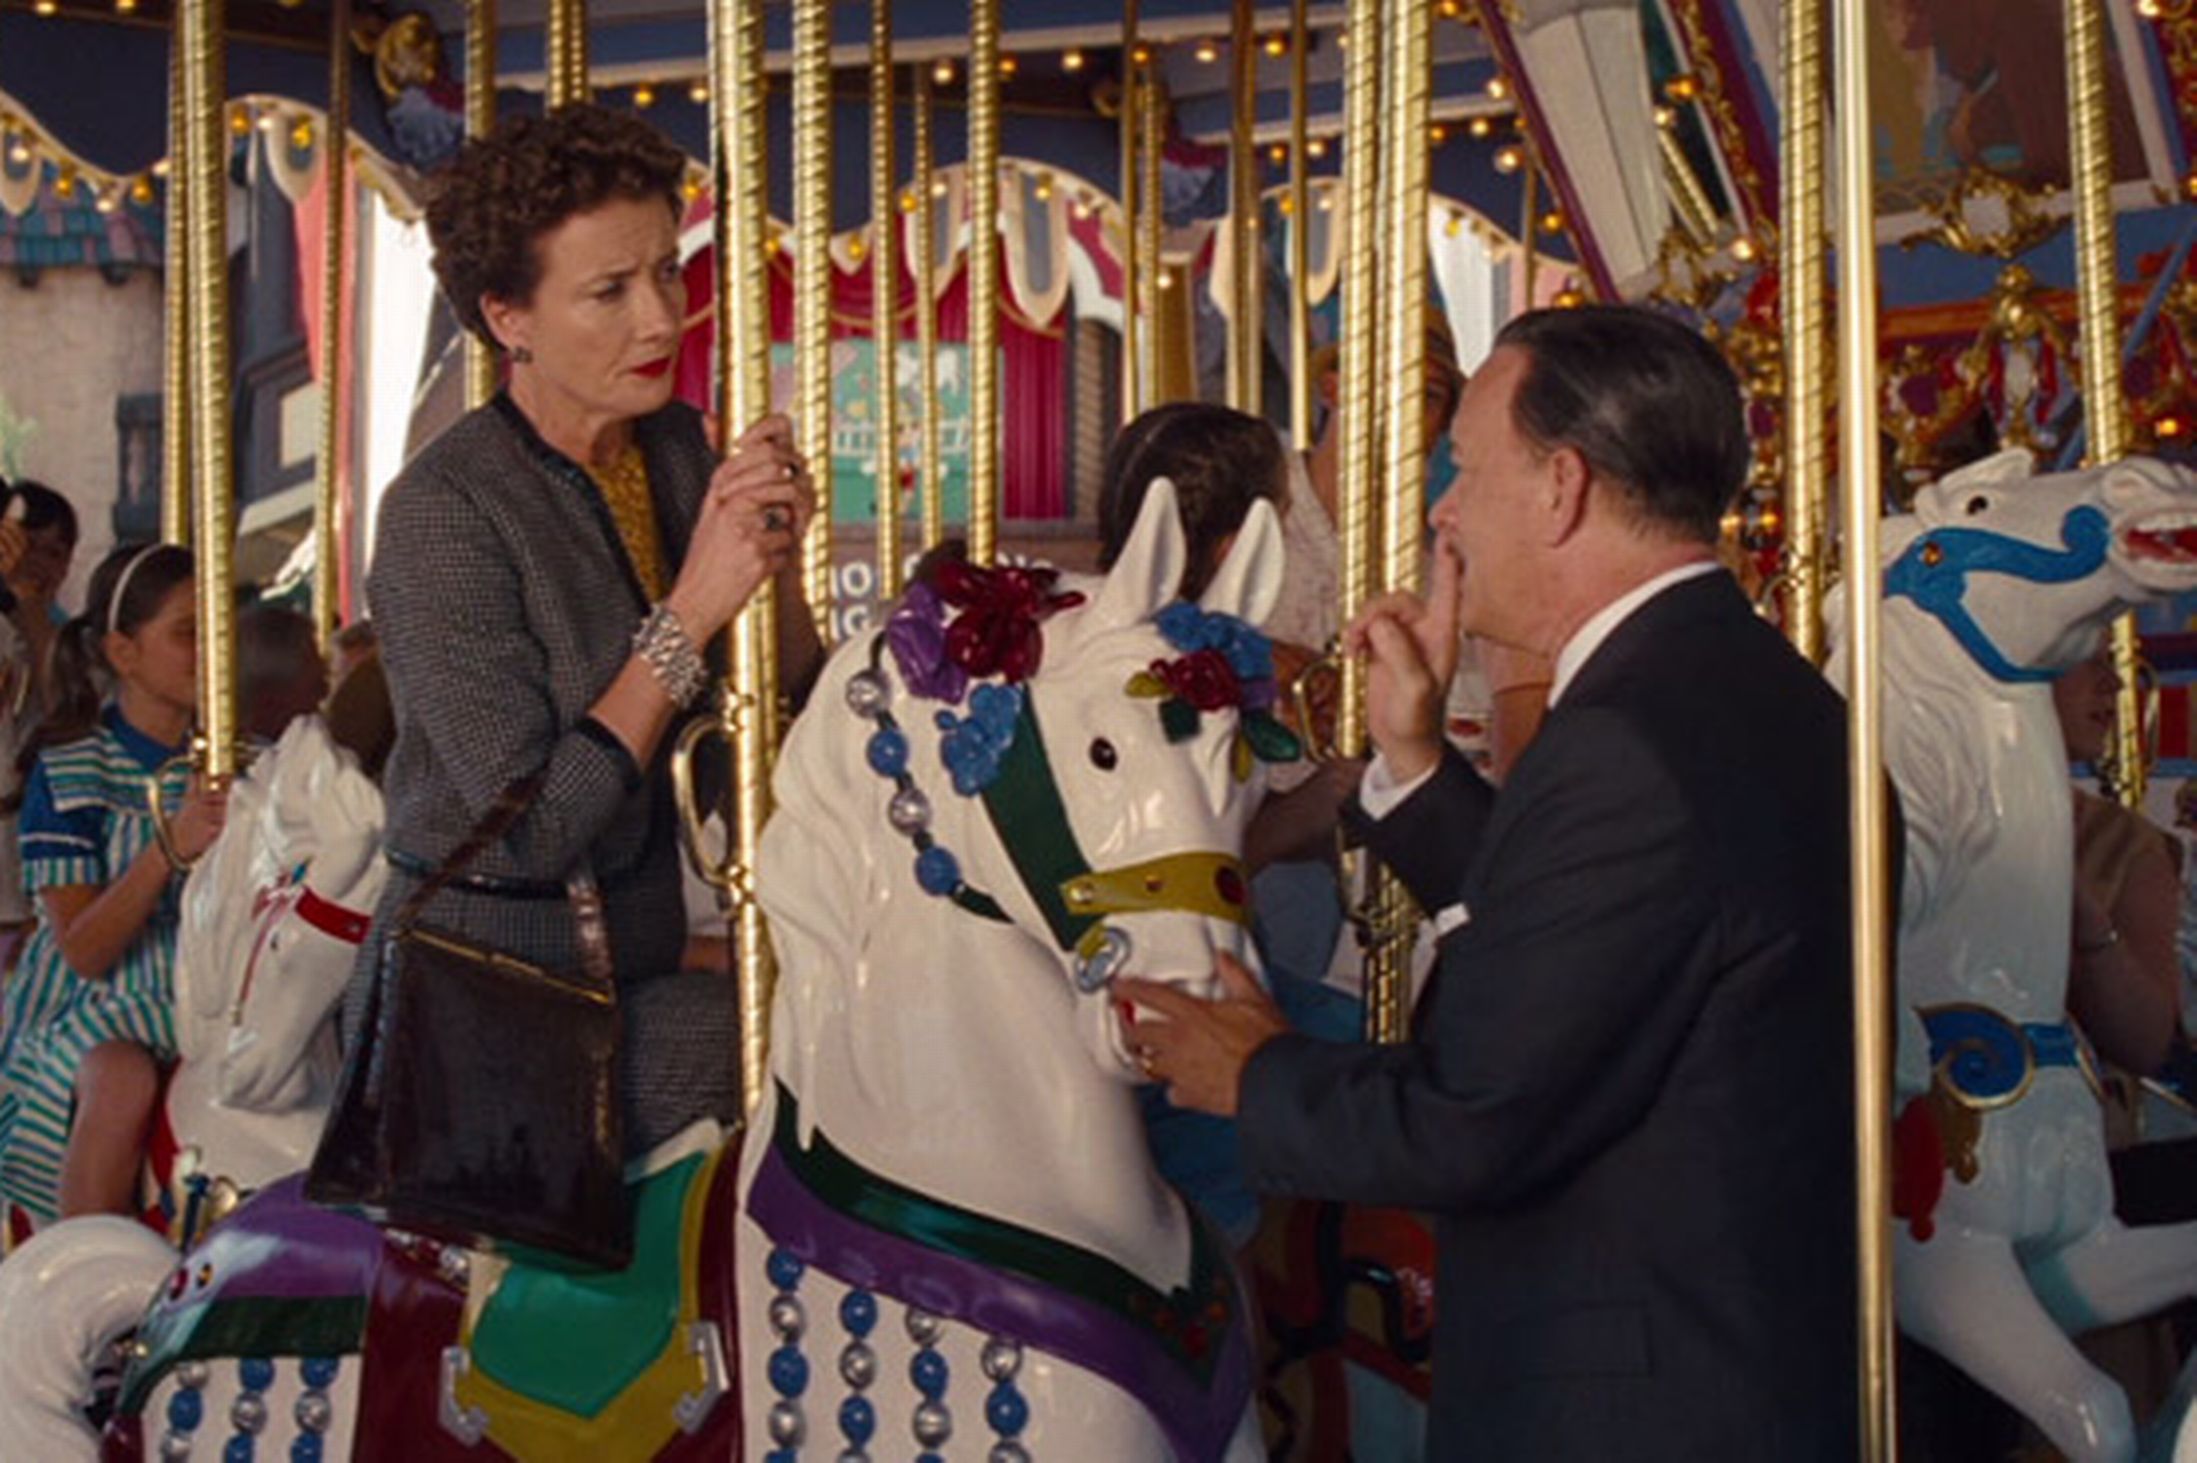 Amazing Saving Mr. Banks Pictures & Backgrounds